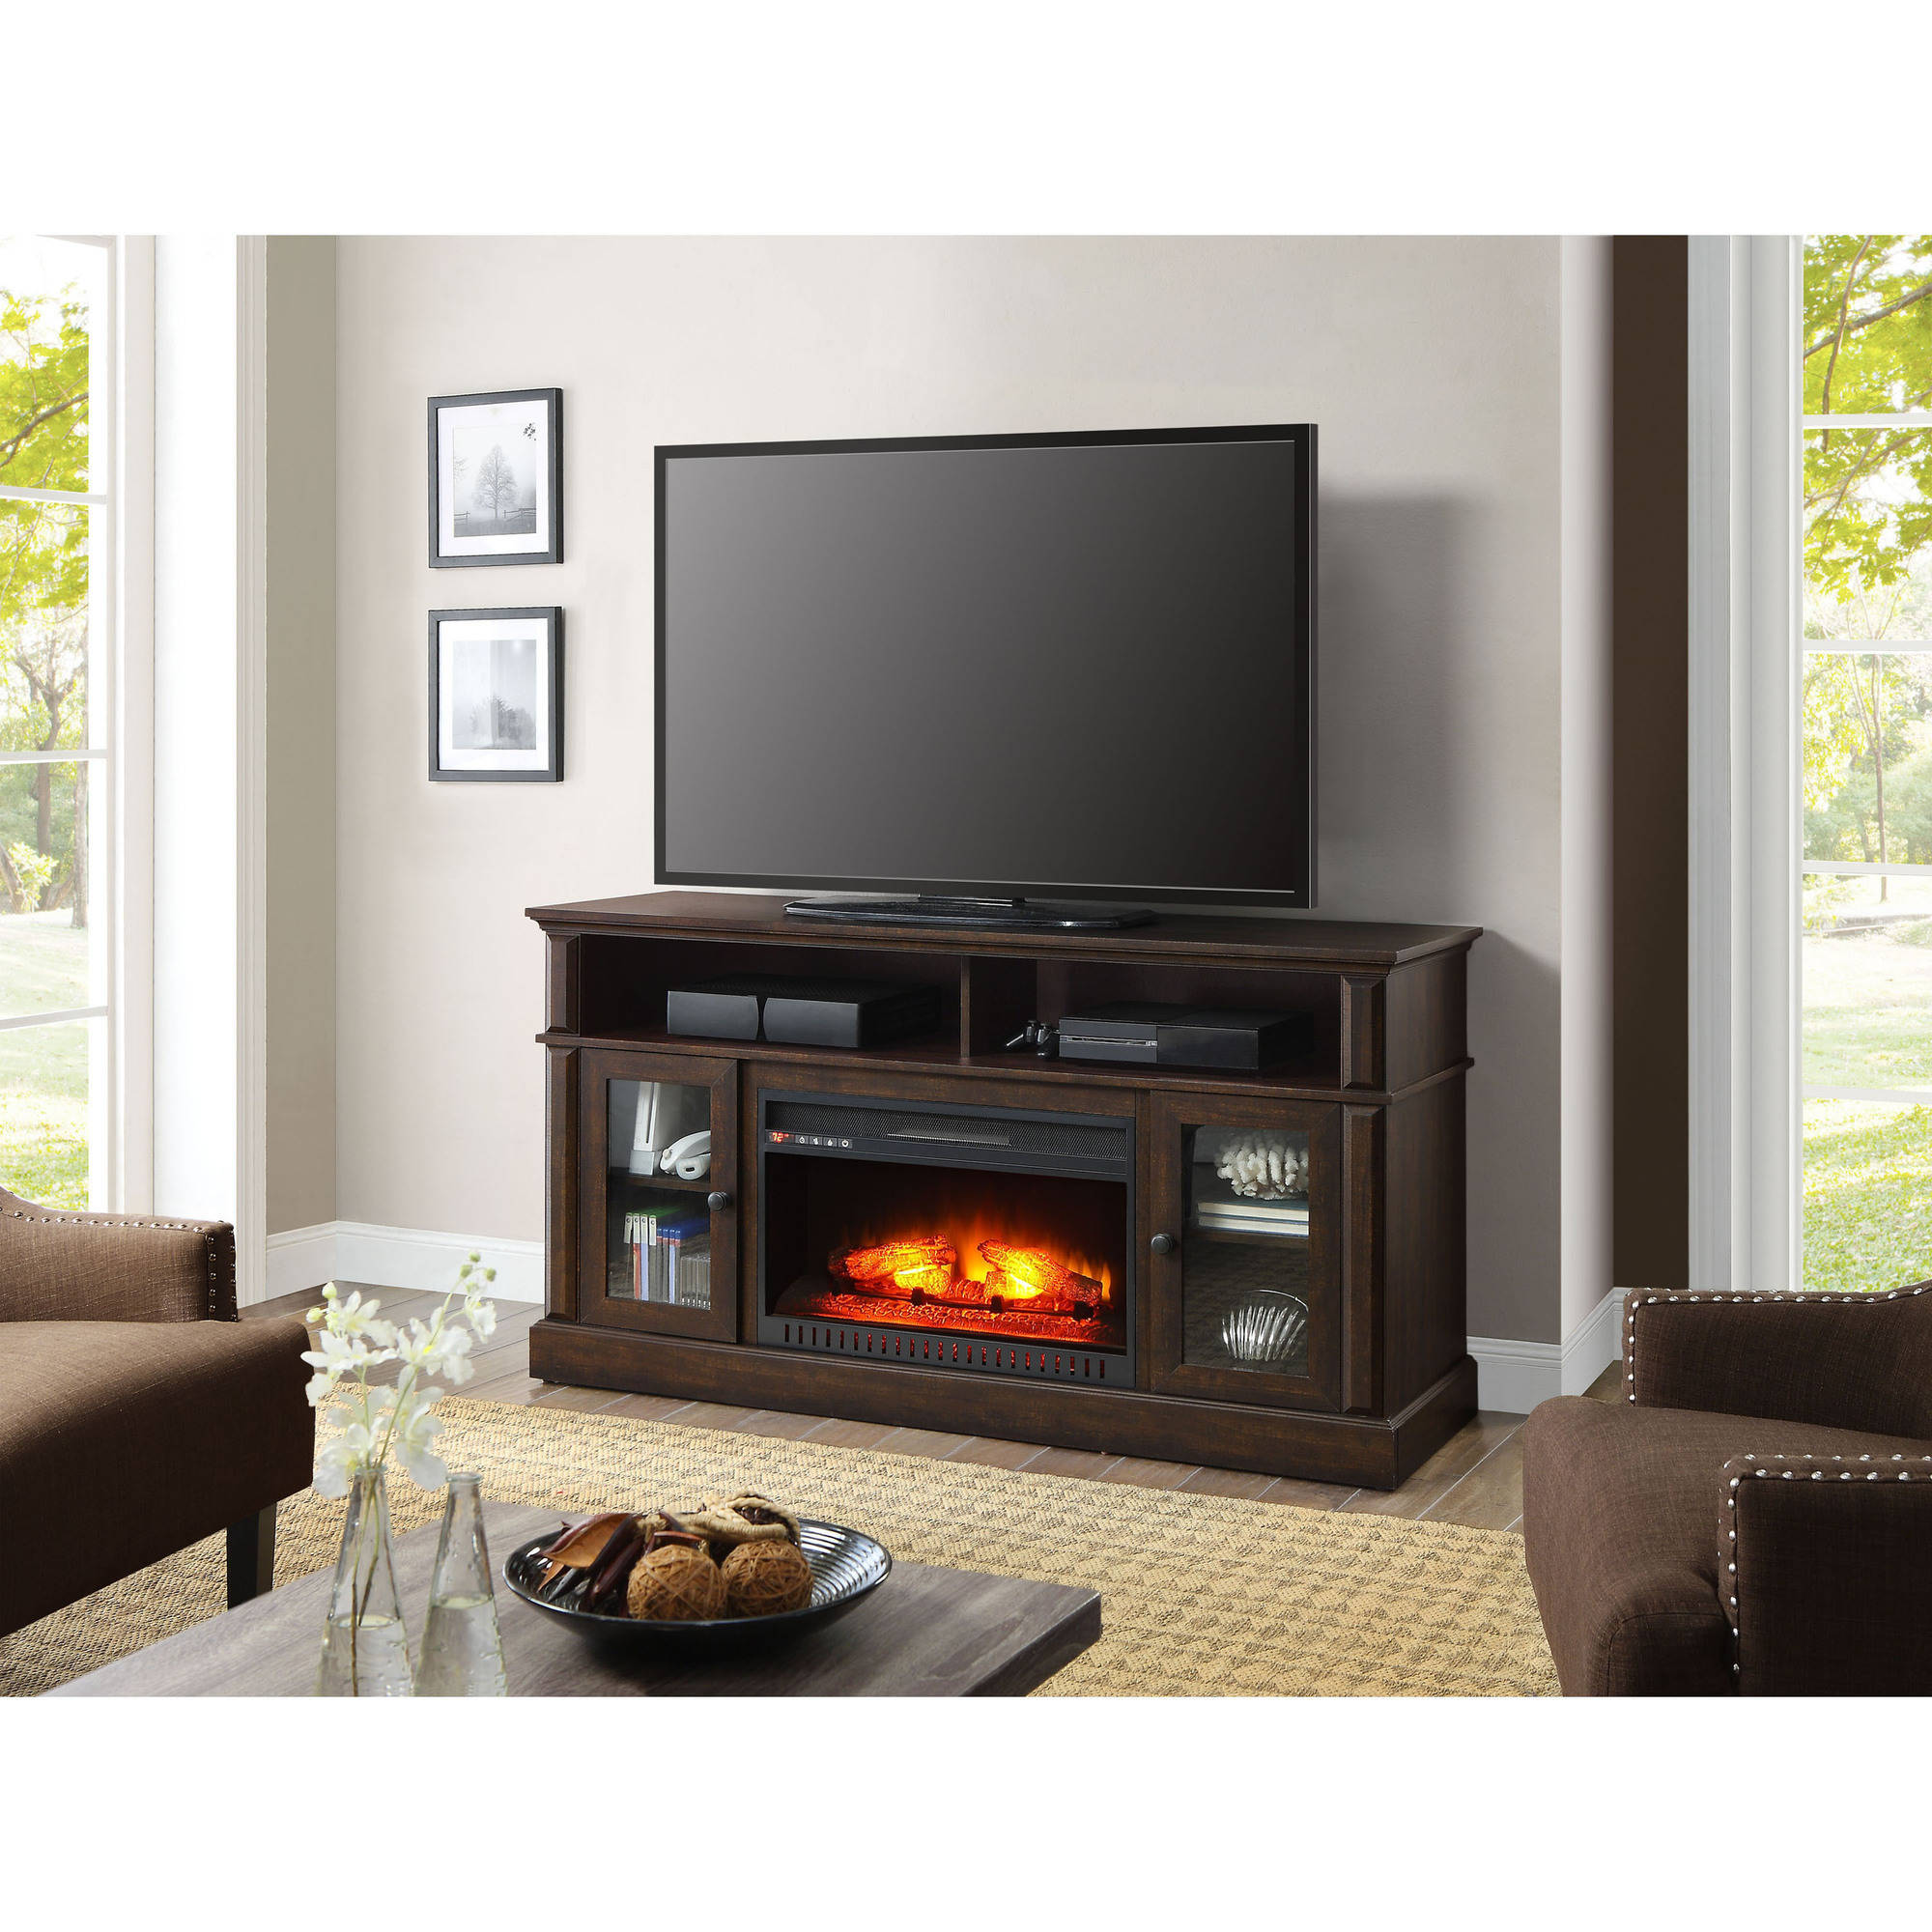 Walmart Electric Fireplace Tv Stand Luxury Whalen Barston Media Fireplace for Tv S Up to 70 Multiple